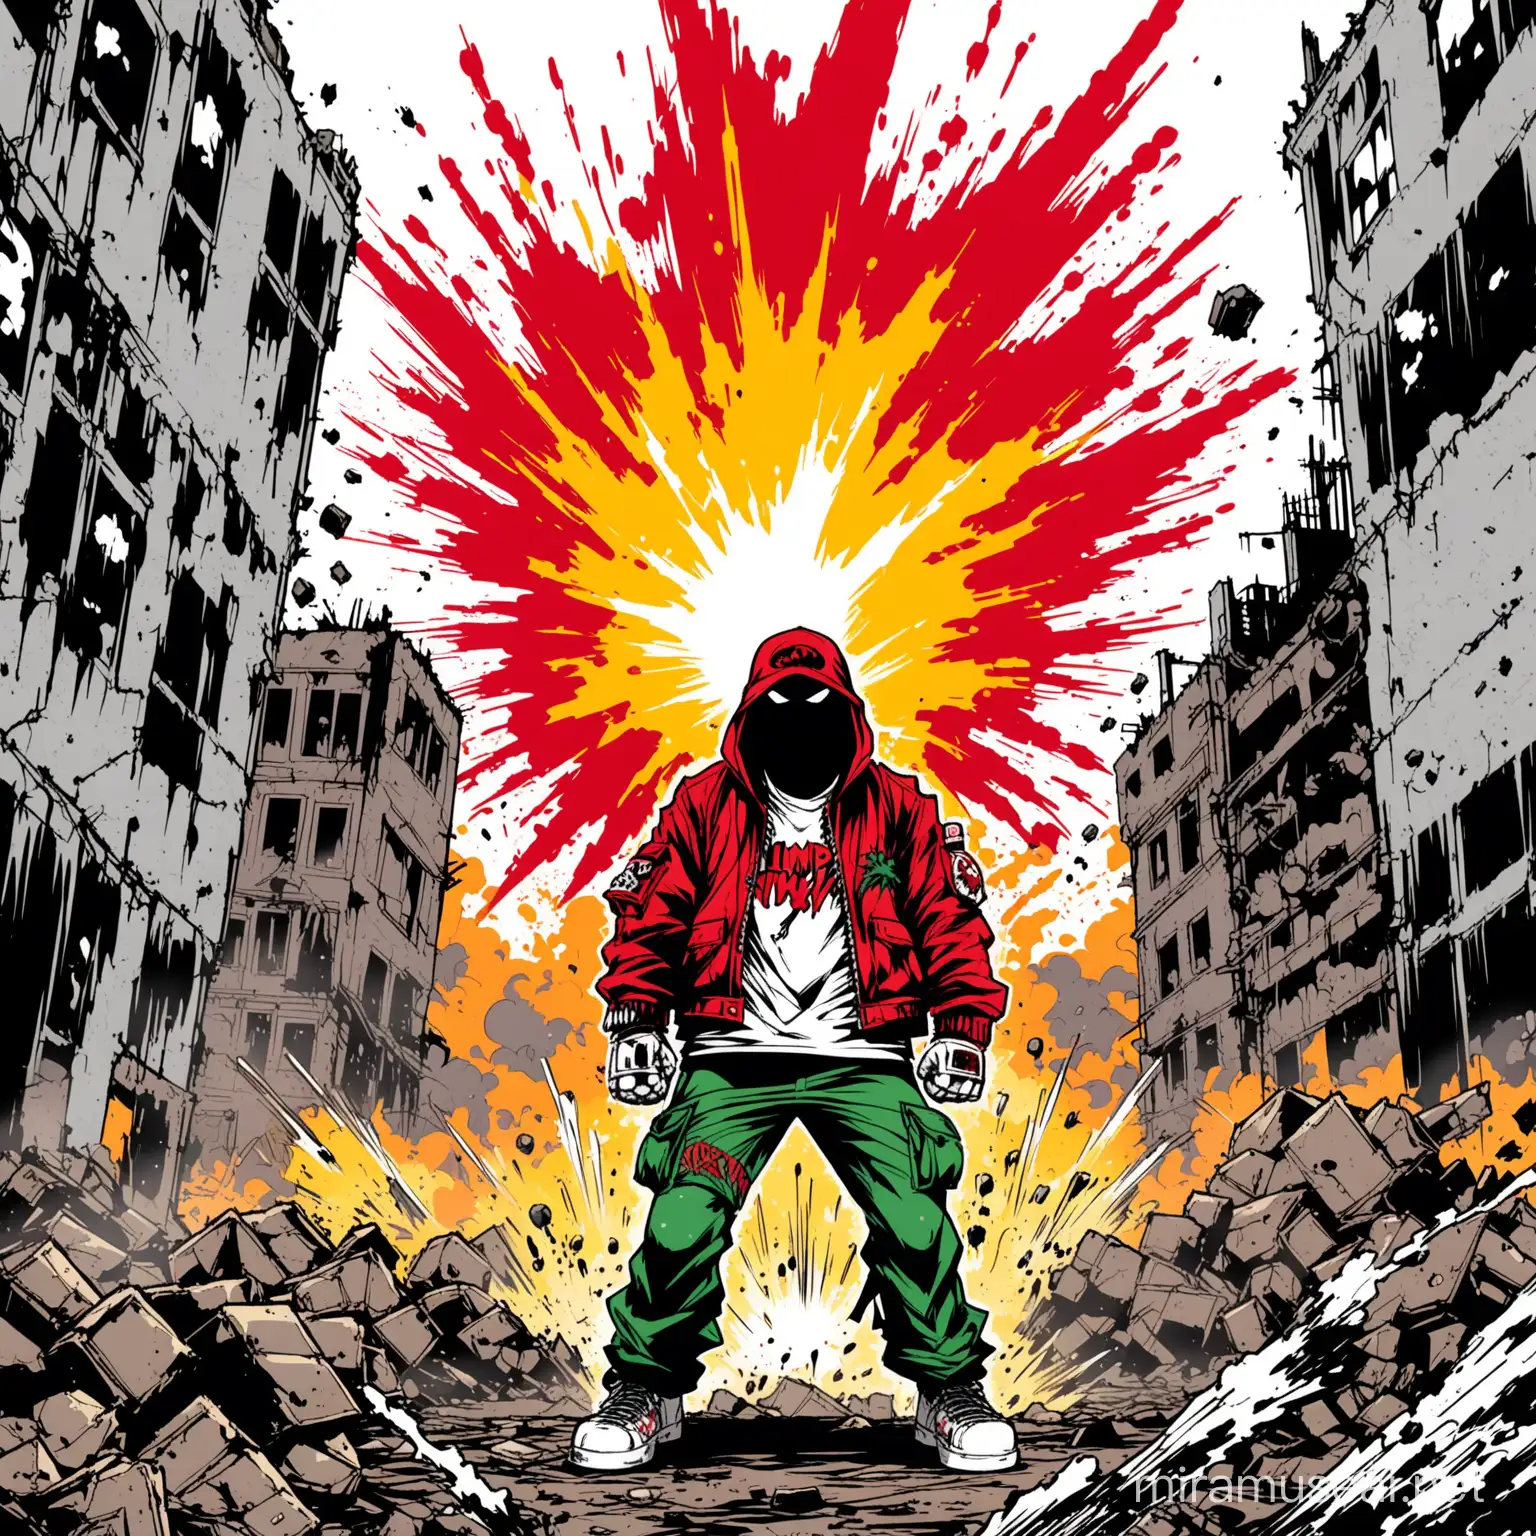 limp bizkit character with explosion in the background, post apocalyptic background, in the style of greg capullo, in the style of todd mcfarlane, american comics style, graffiti style, 90s art style, white background